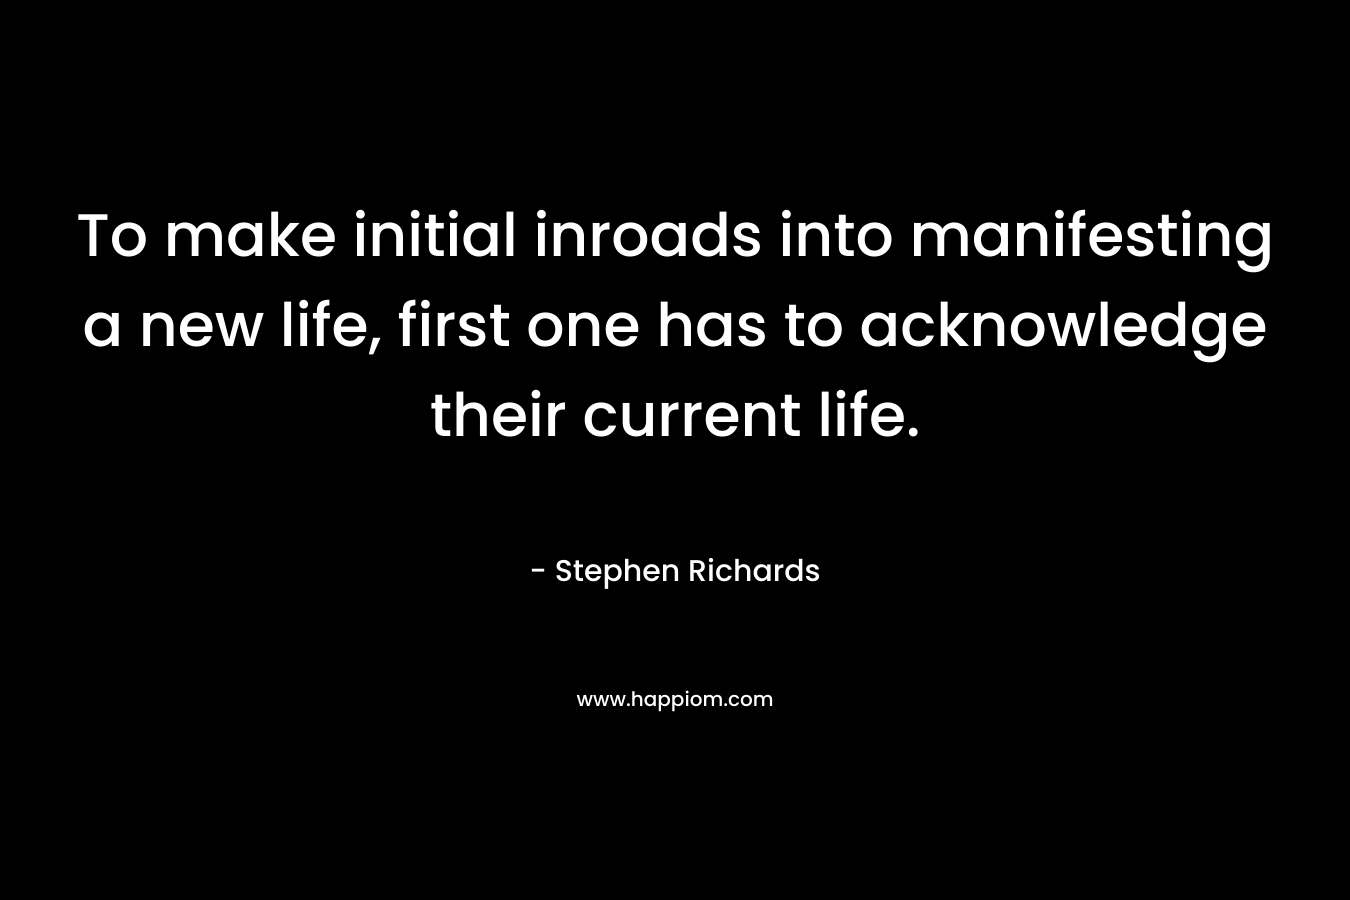 To make initial inroads into manifesting a new life, first one has to acknowledge their current life.